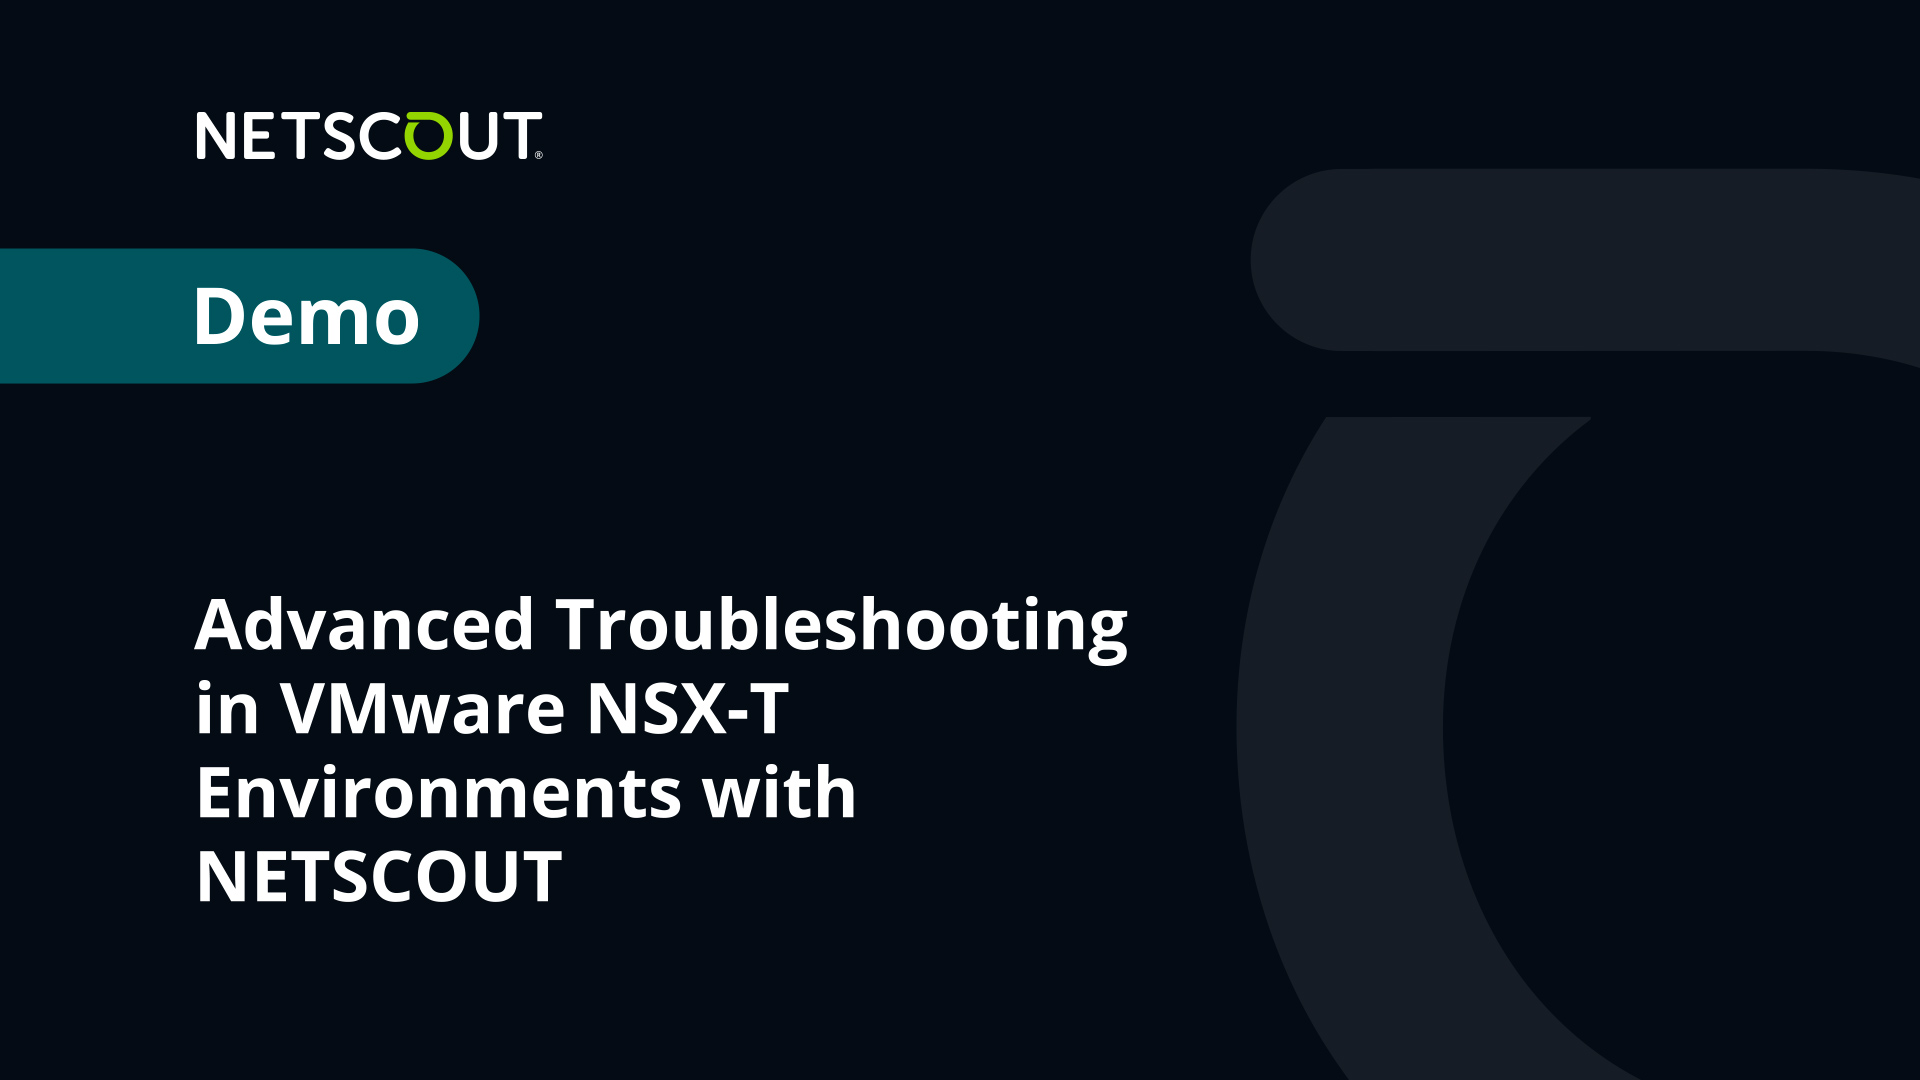 Advanced Troubleshooting in VMware